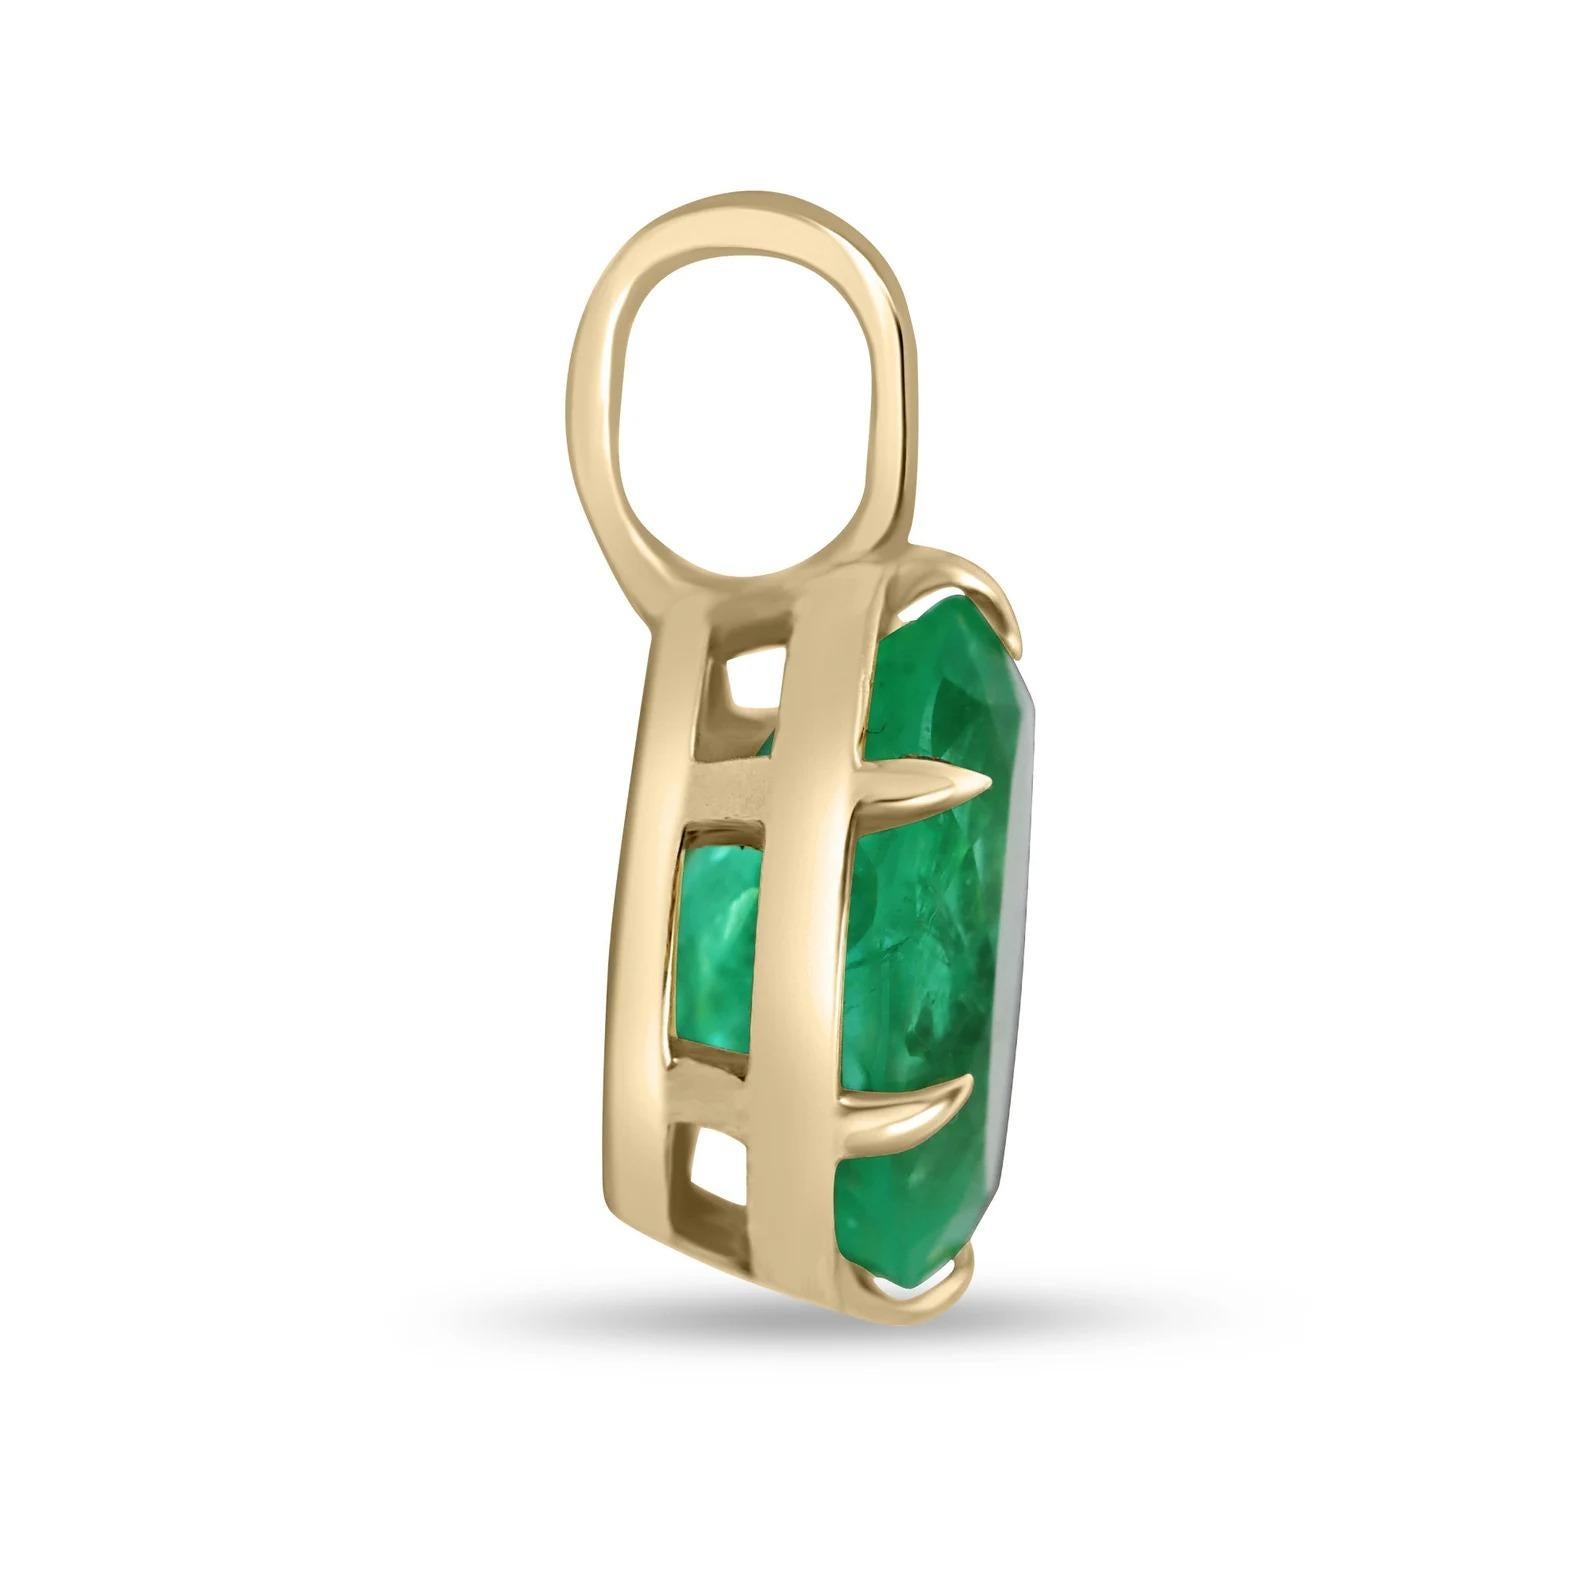 Featured is a stunning, Colombian emerald, oval cut pendant. The gemstone carries 3.0 carats of natural, spring-green emerald. The stone also displays very good luster, with gorgeous, eye clean clarity. Minor imperfections are totally normal and